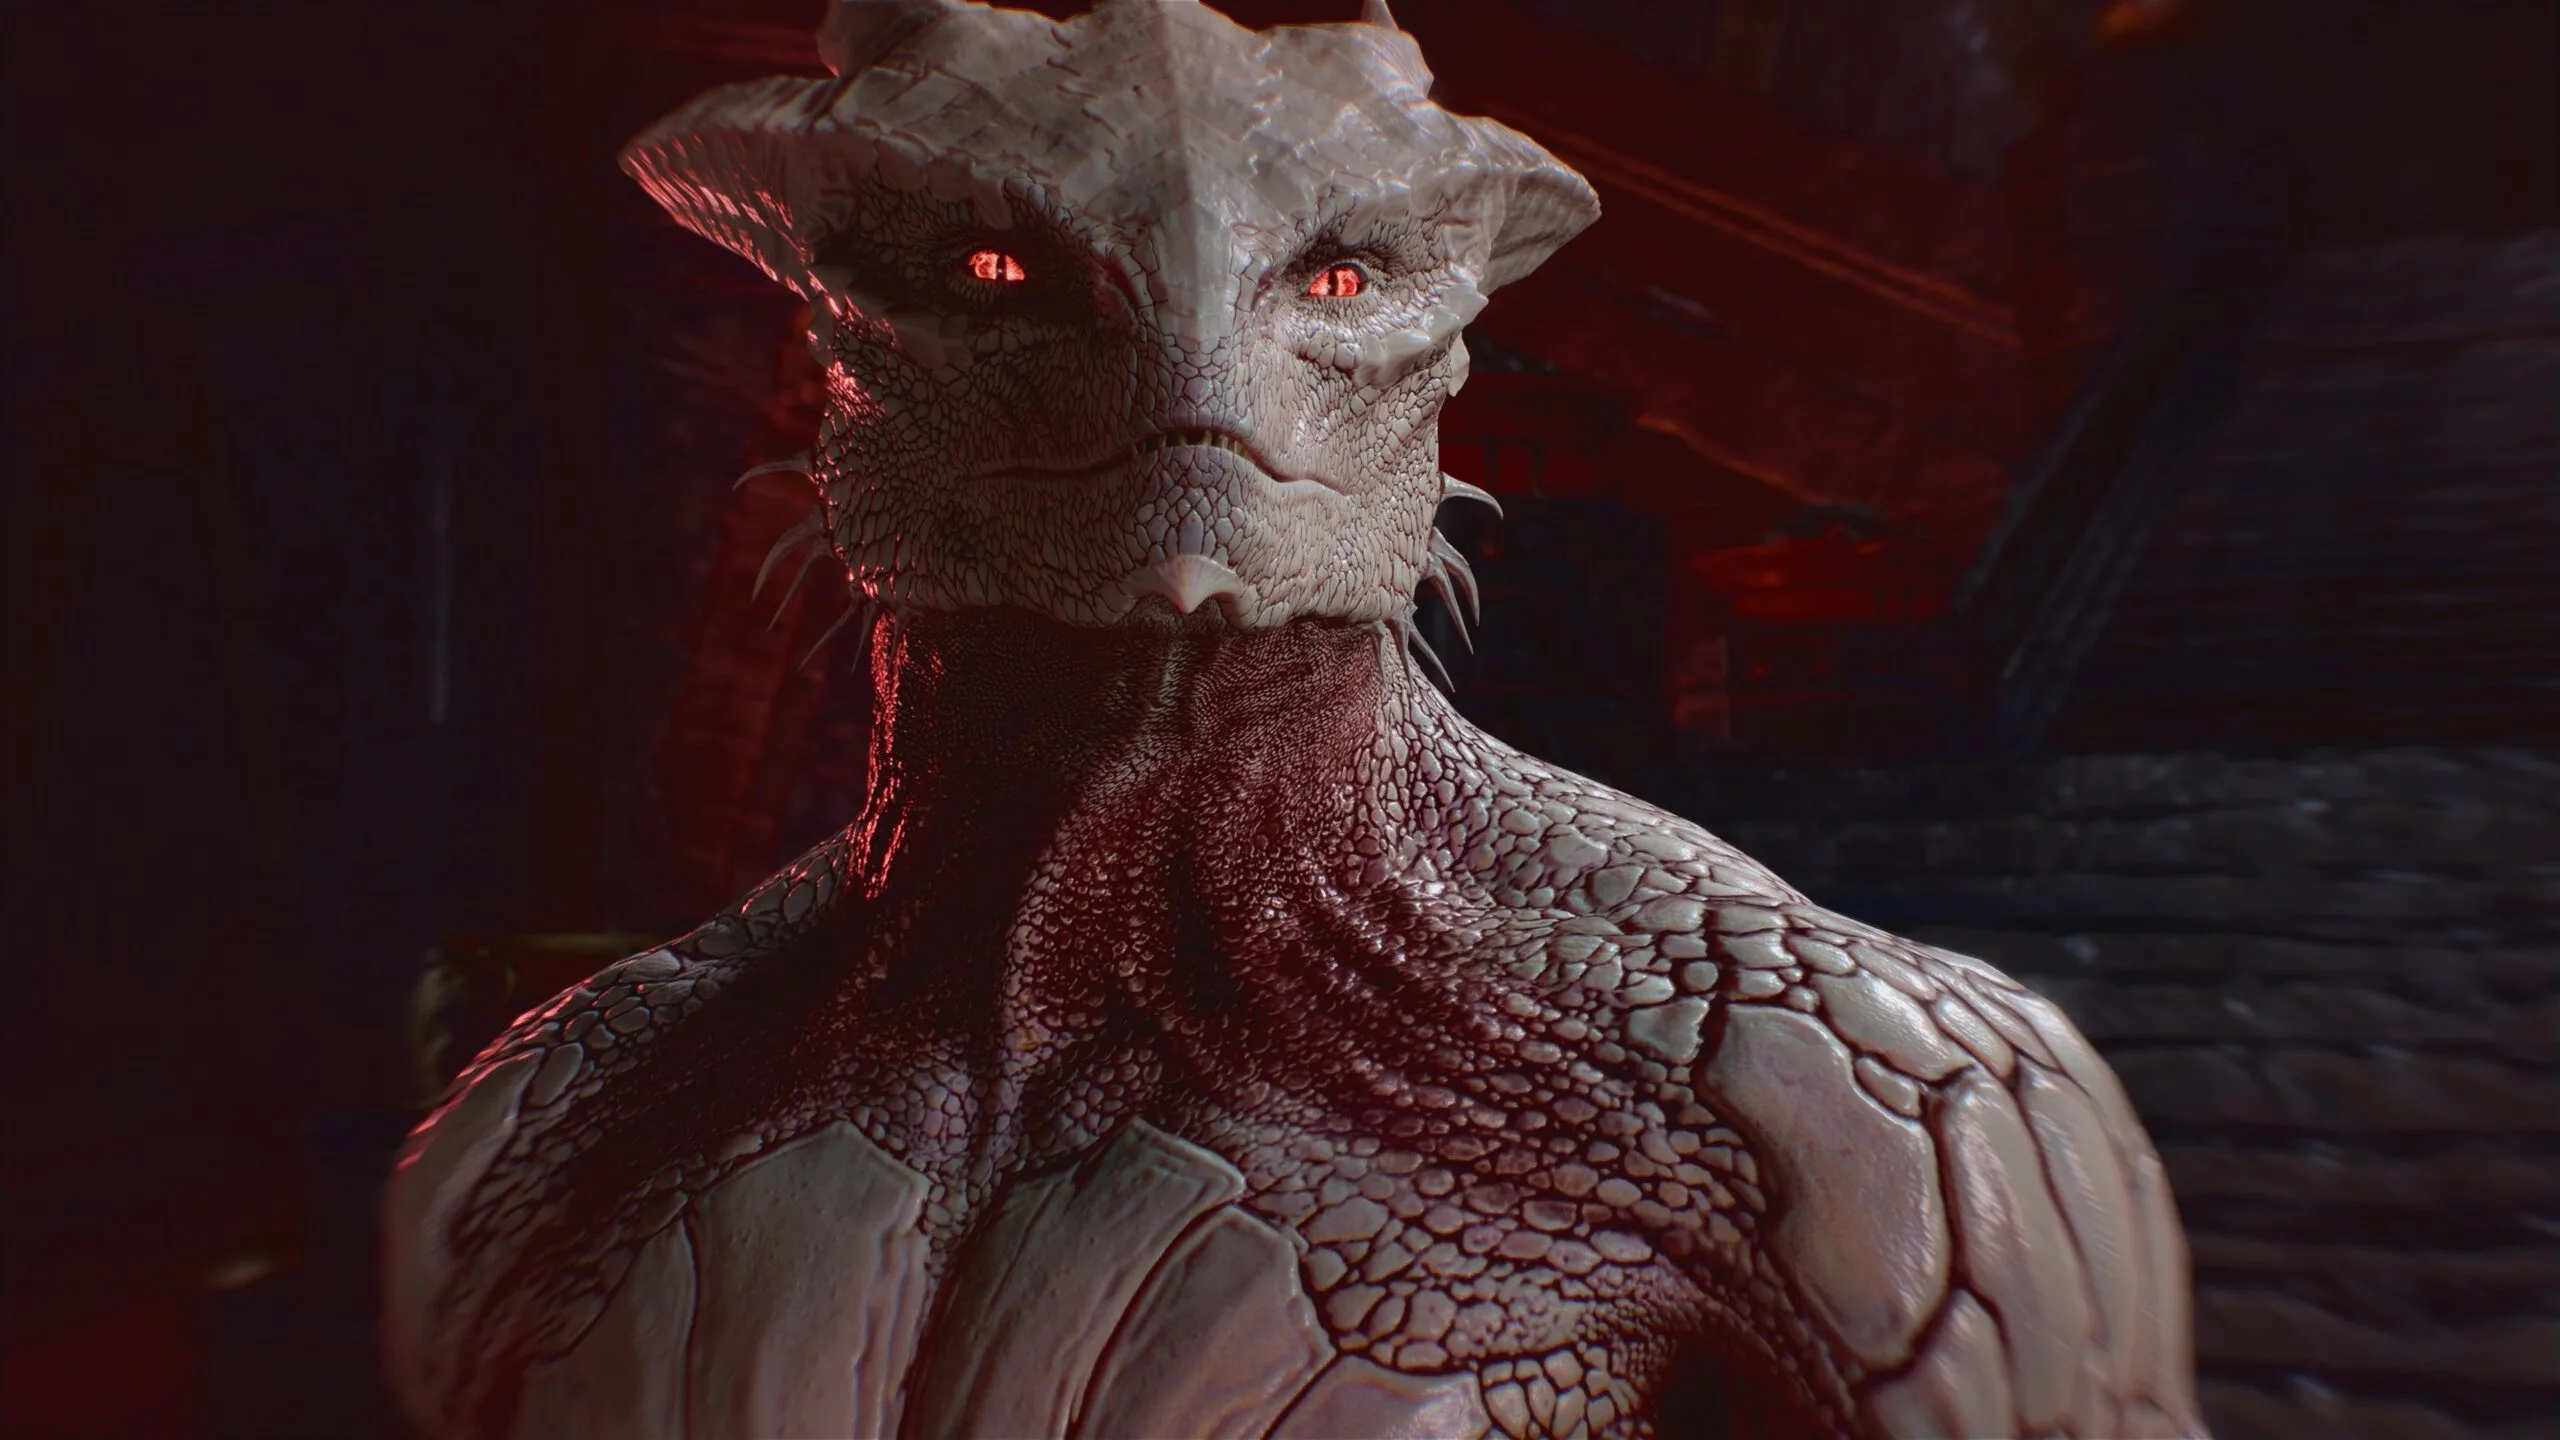 An albino dragonborn, visible from the chest up, who is the default avatar for the Dark Urge playthrough in Baldur’s Gate 3